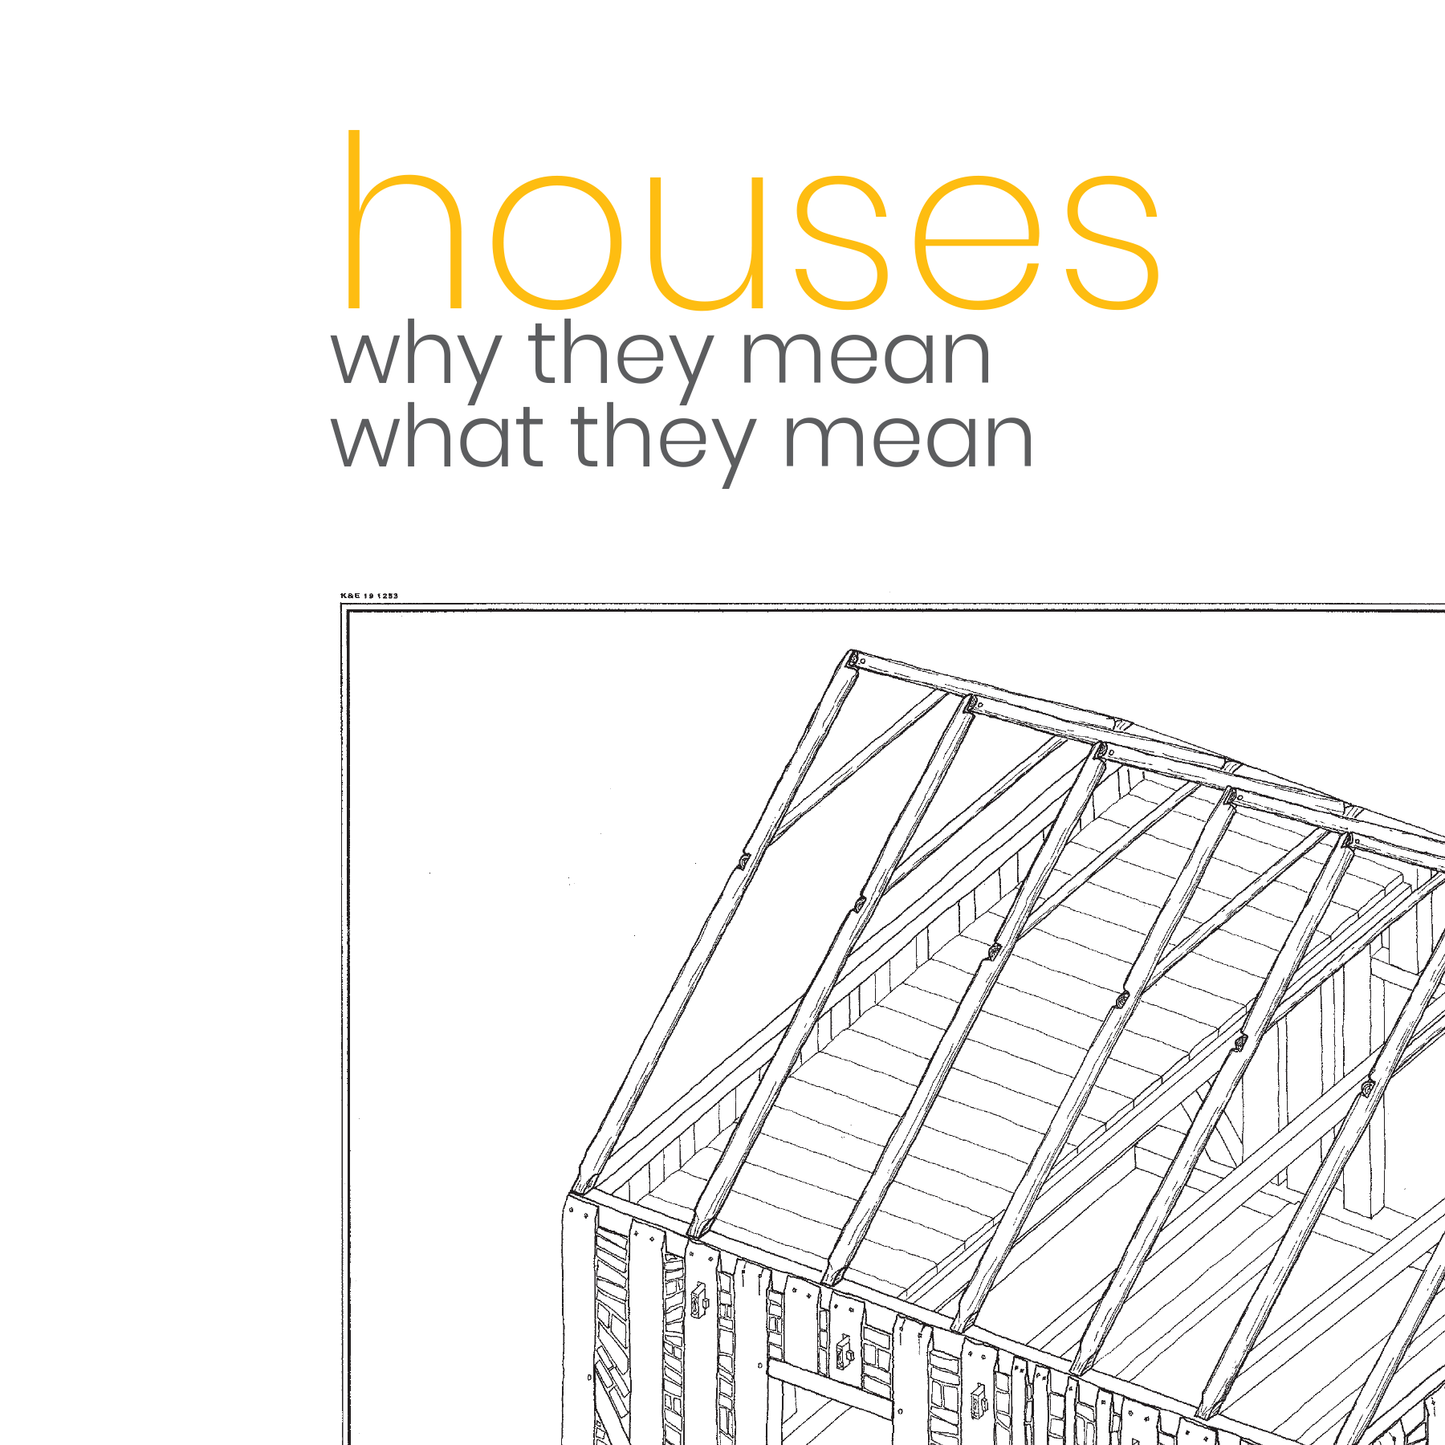 houses: why they mean what they mean by Dayna Lynn Nuckolls